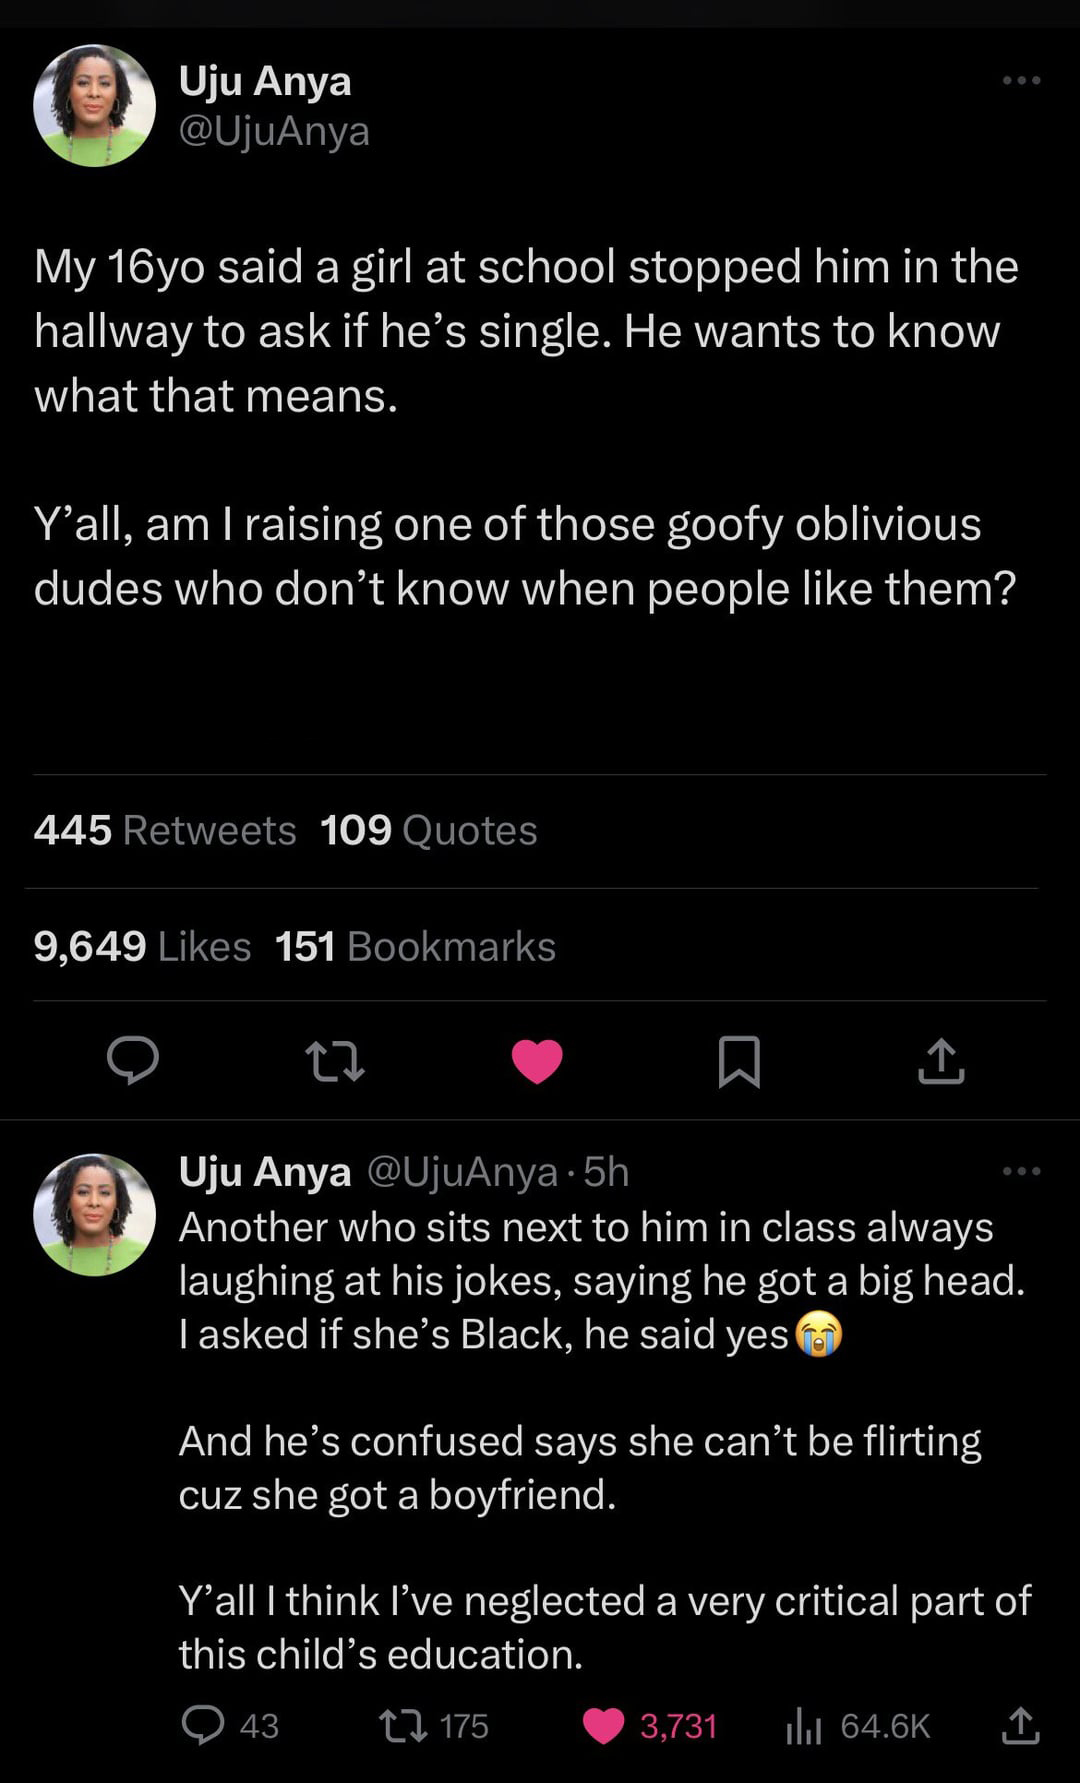 funny tweets and memes - screenshot - Uju Anya My 16yo said a girl at school stopped him in the hallway to ask if he's single. He wants to know what that means. Y'all, am I raising one of those goofy oblivious dudes who don't know when people them? 445 10